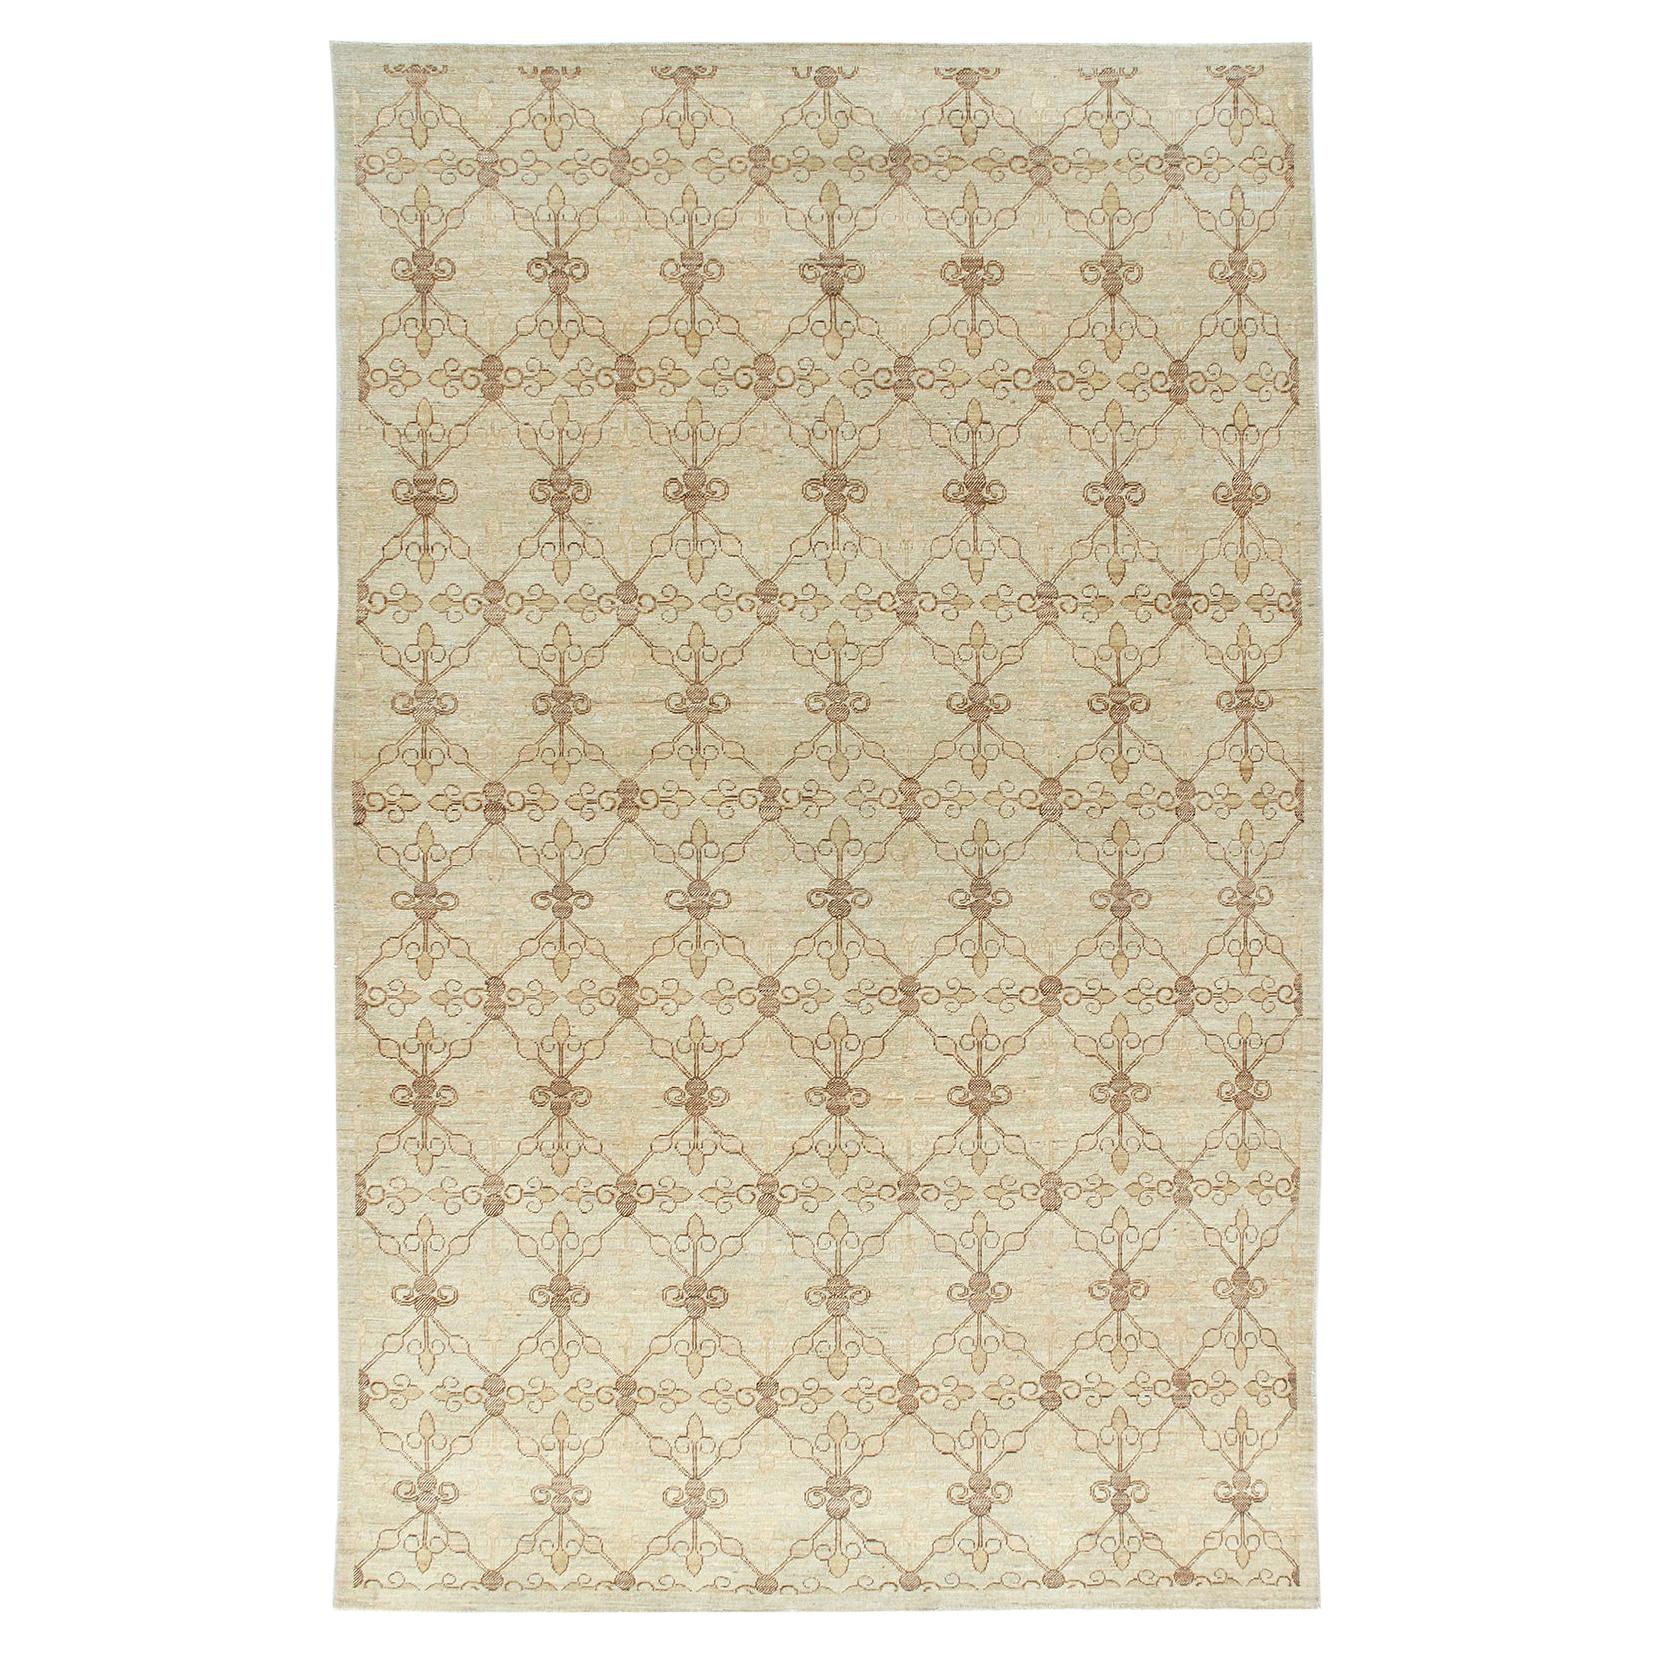 Contemporary Decorative Handknotted Rug with a Transitional Design